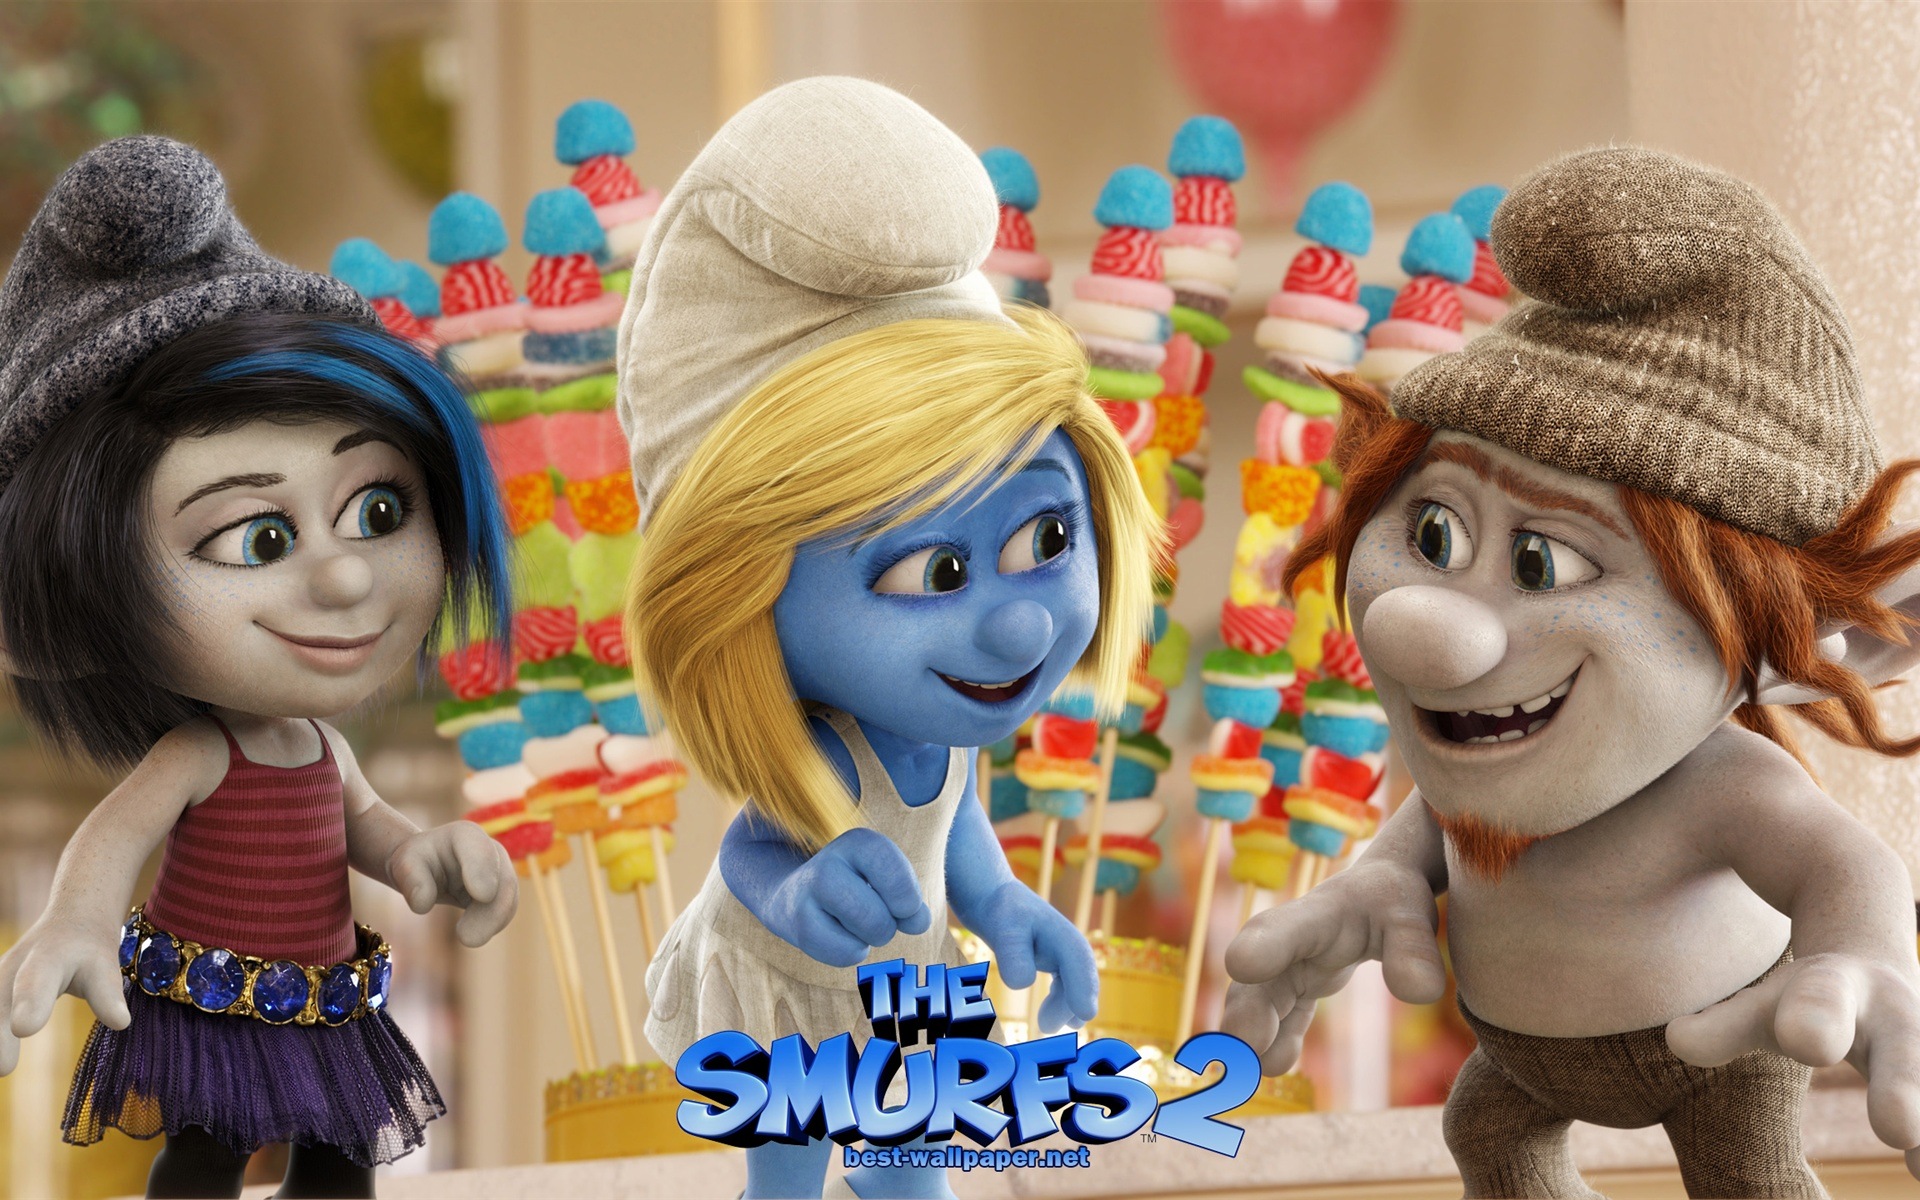 The Smurfs 2 HD movie wallpapers #5 - 1920x1200